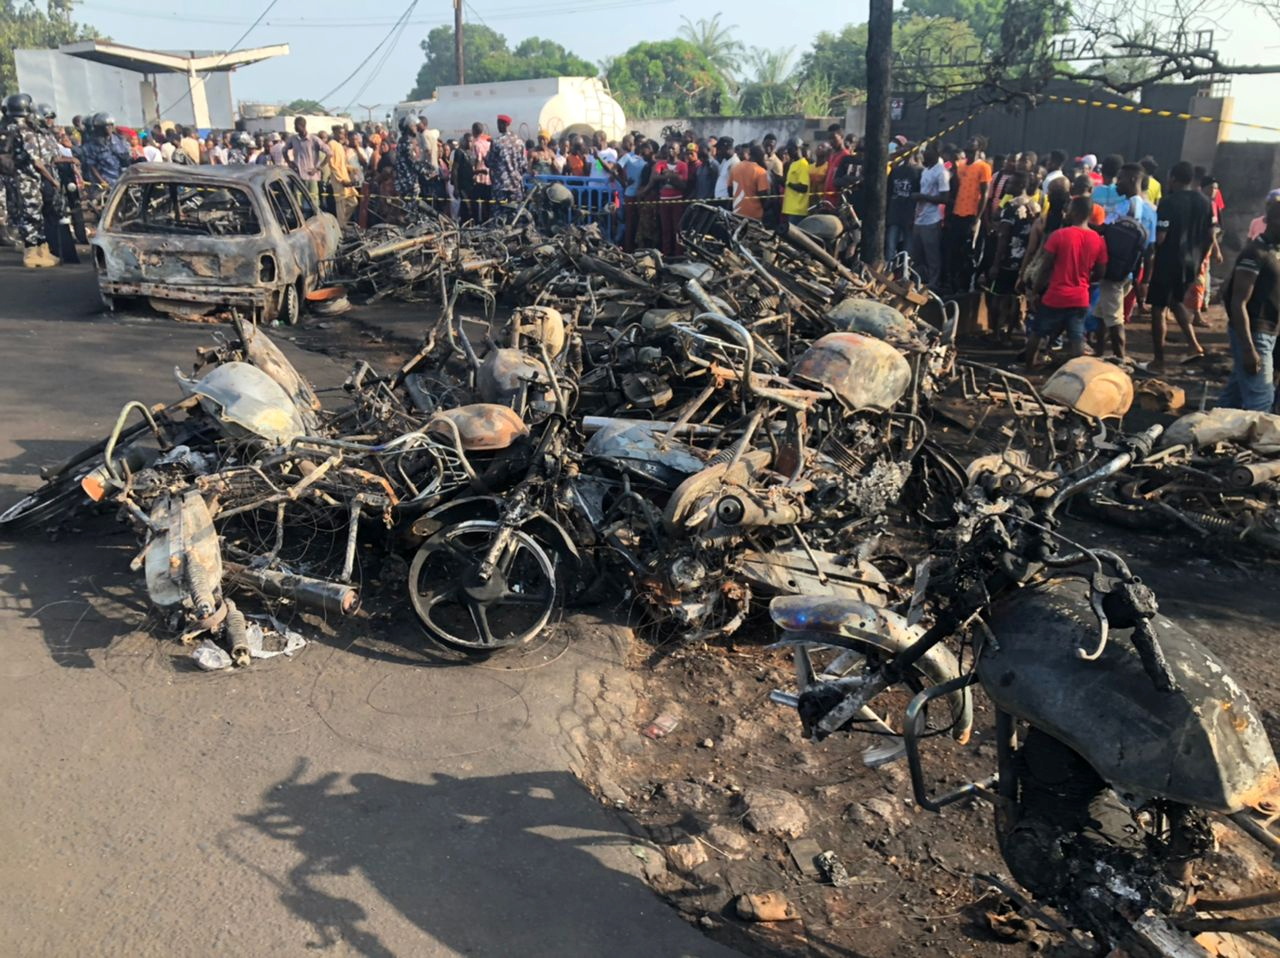 People watch burnt car and motorcycles after a fuel tanker explosion in Freetown